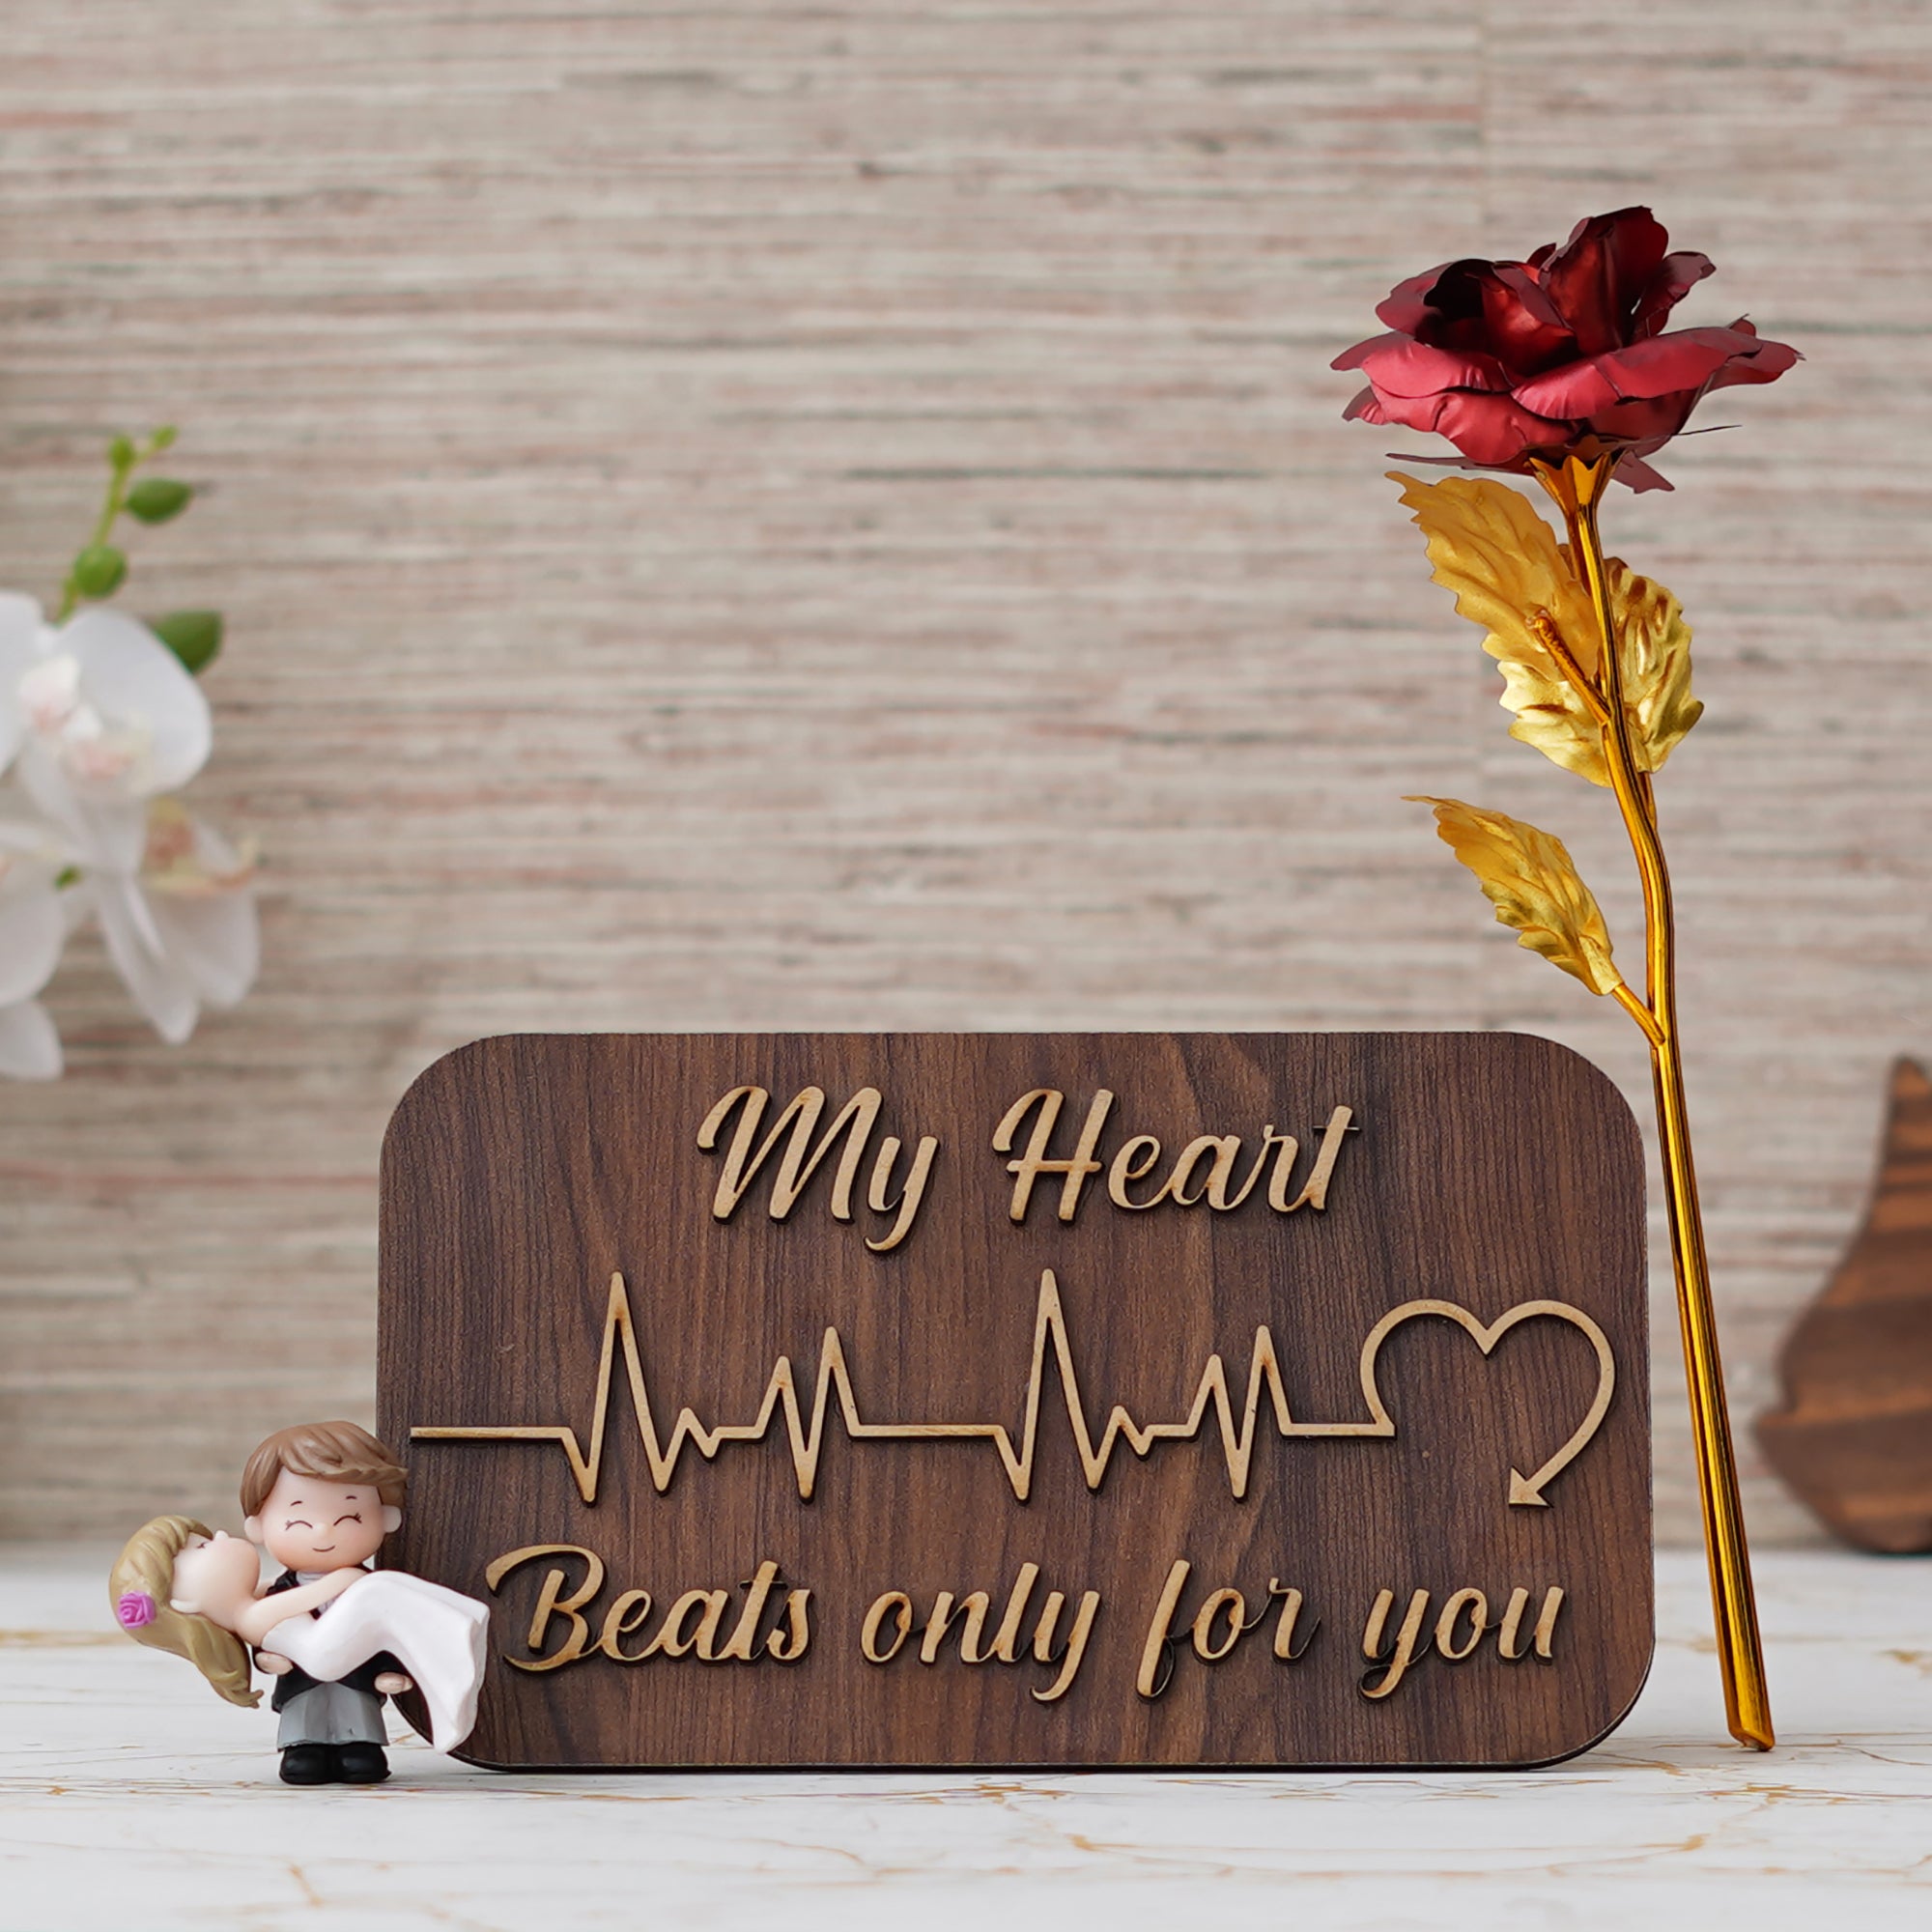 Valentine Combo of Golden Red Rose Gift Set, "My Heart Beats Only For You" Wooden Showpiece With Stand, Bride Kissing Groom Romantic Polyresin Decorative Showpiece